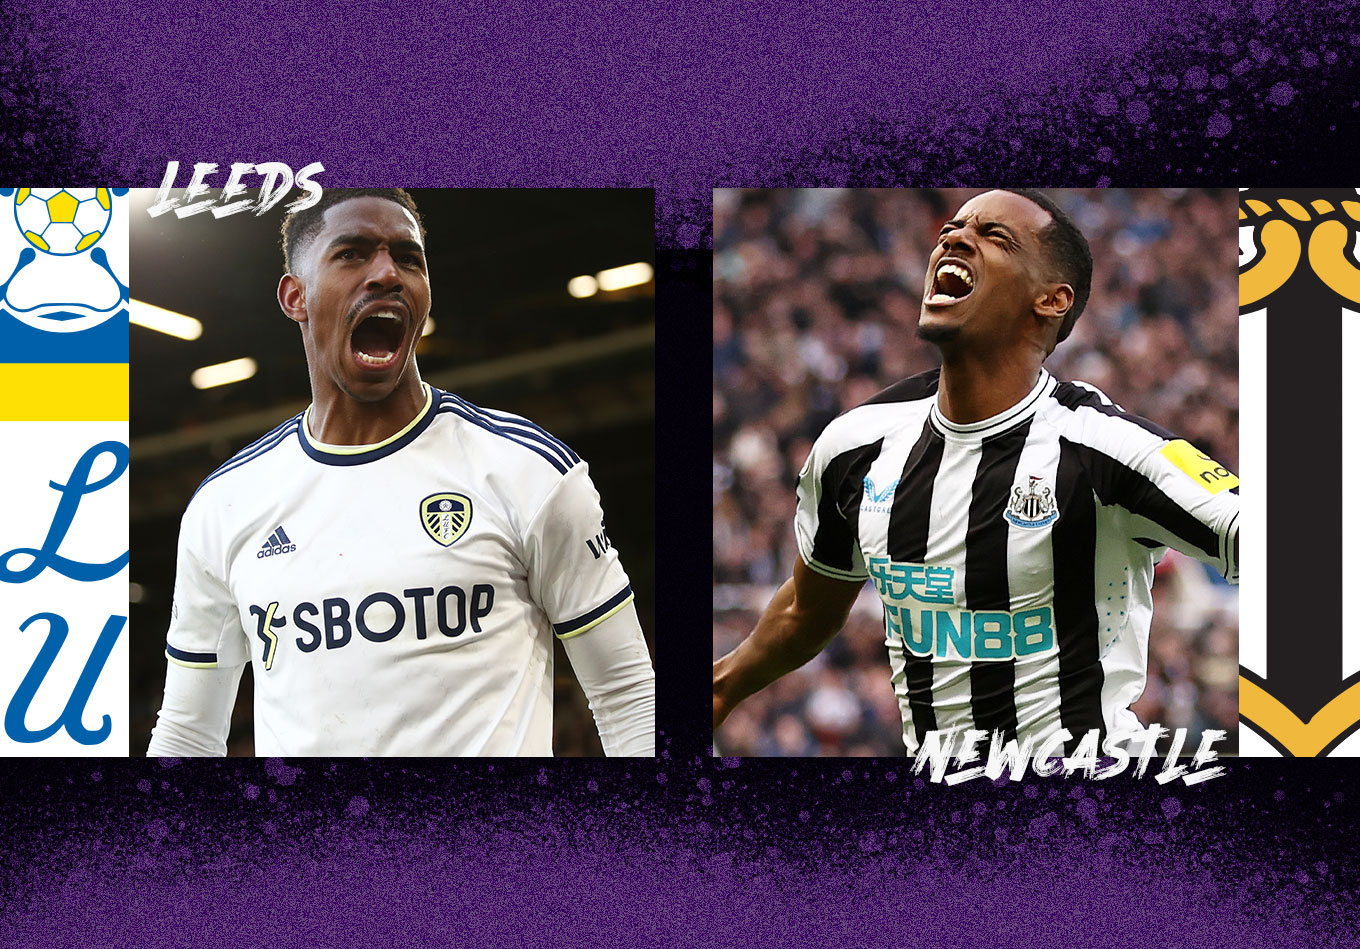 Leeds vs Newcastle: Prediction and Preview